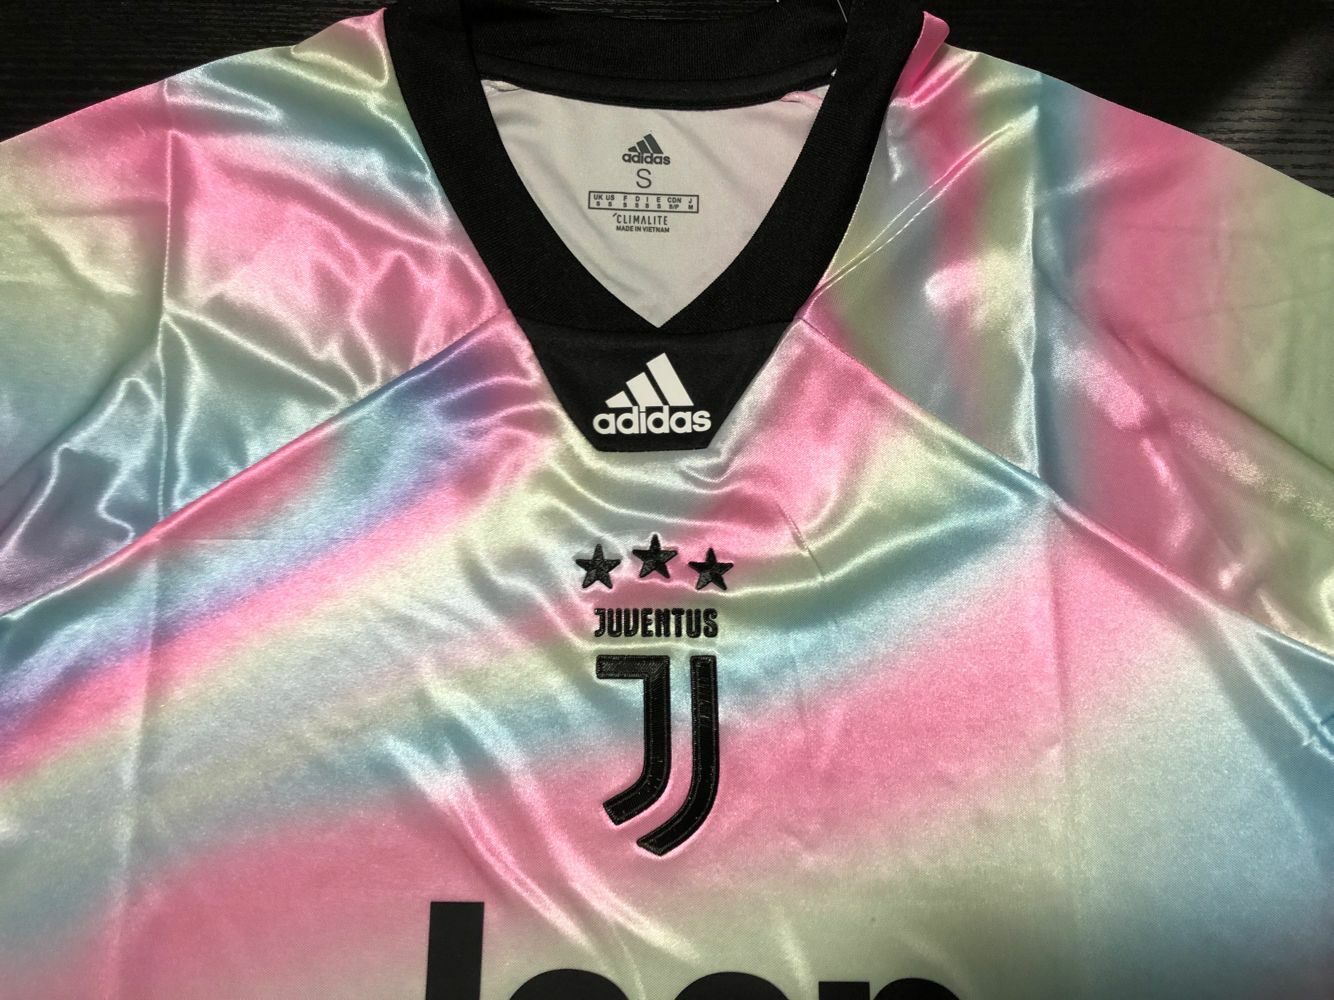 Specified questionnaire embarrassed Camisa Juventus Ea Sport Best Outlet, 68% OFF |  backup.goldenvillagepalms.com